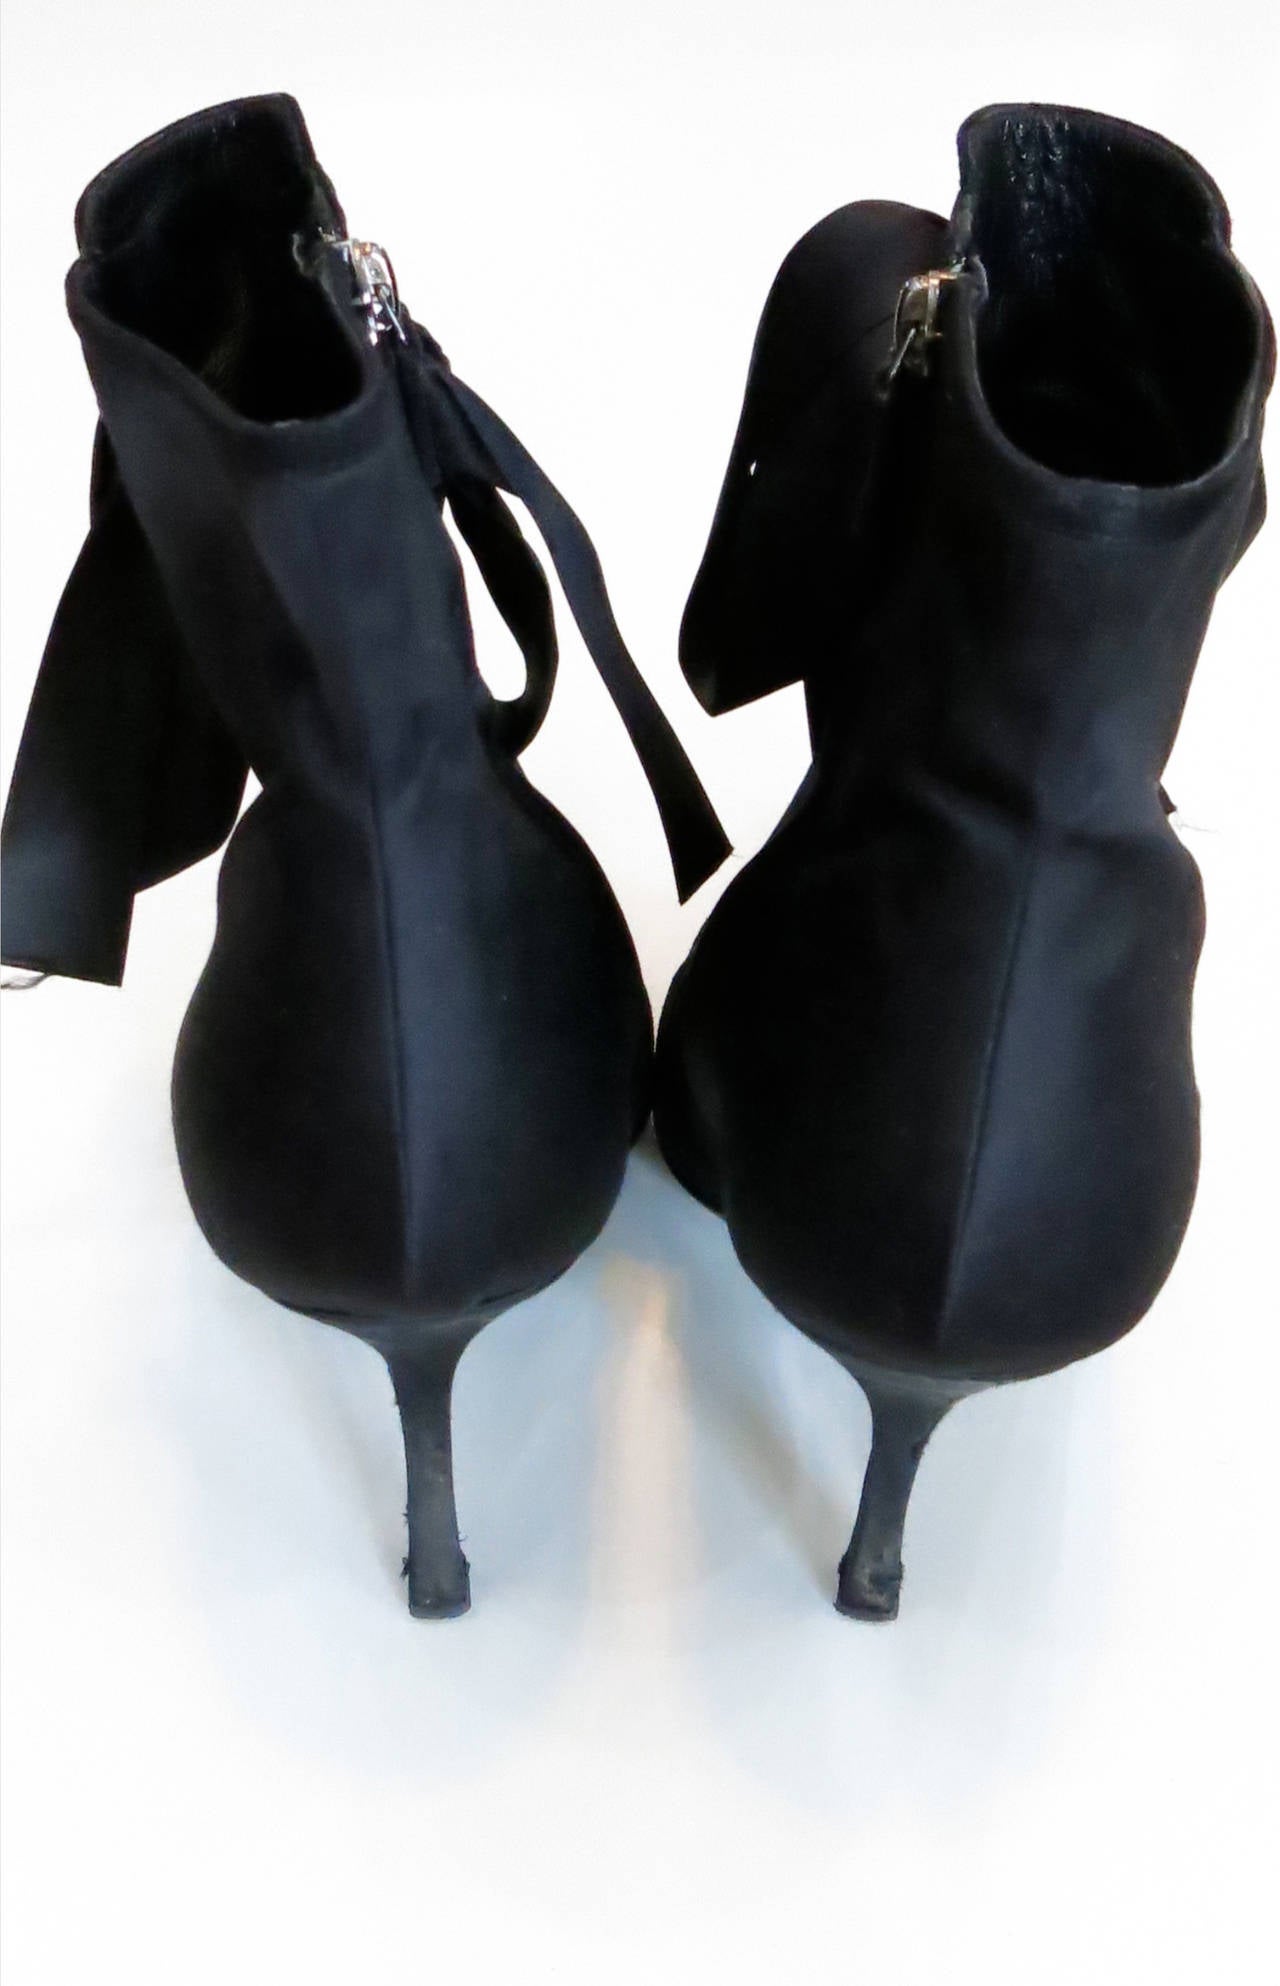 1990s Oscar de la Renta Black Satin and Suede Ankle Boots In Good Condition For Sale In Brooklyn, NY